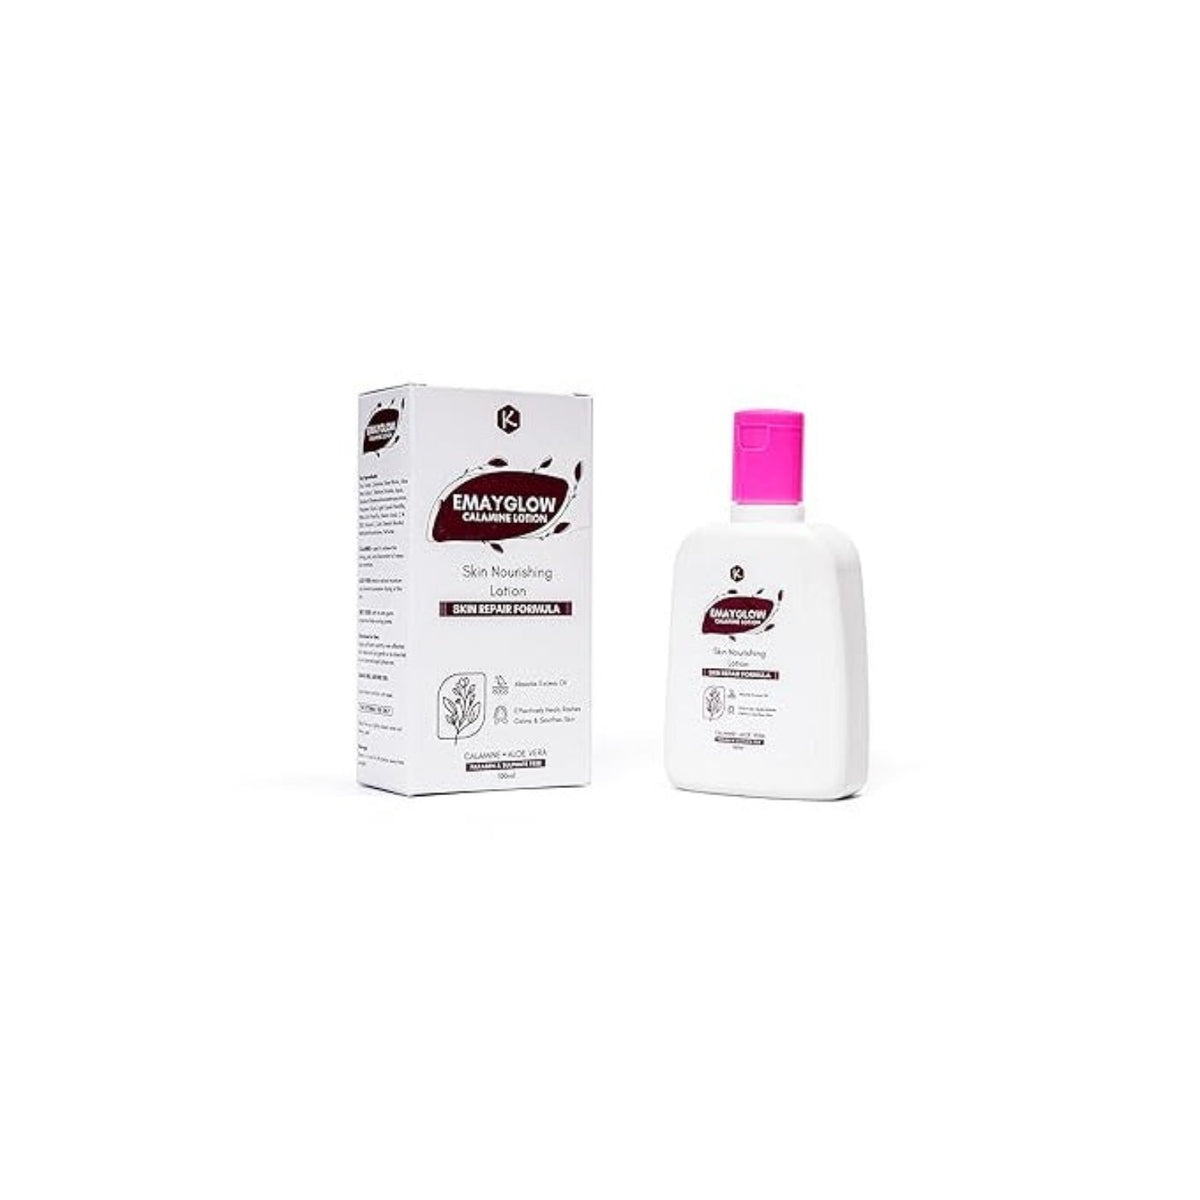 Kalyan Wellness Emayglow Calamine Lotion Treats Excess Oil,Rashes,Itchiness,Skin Irritation & Moisturizes Body Contains Vitamin E,Rose Water & Aloe Vera Extracts All Skin-Types 100ml